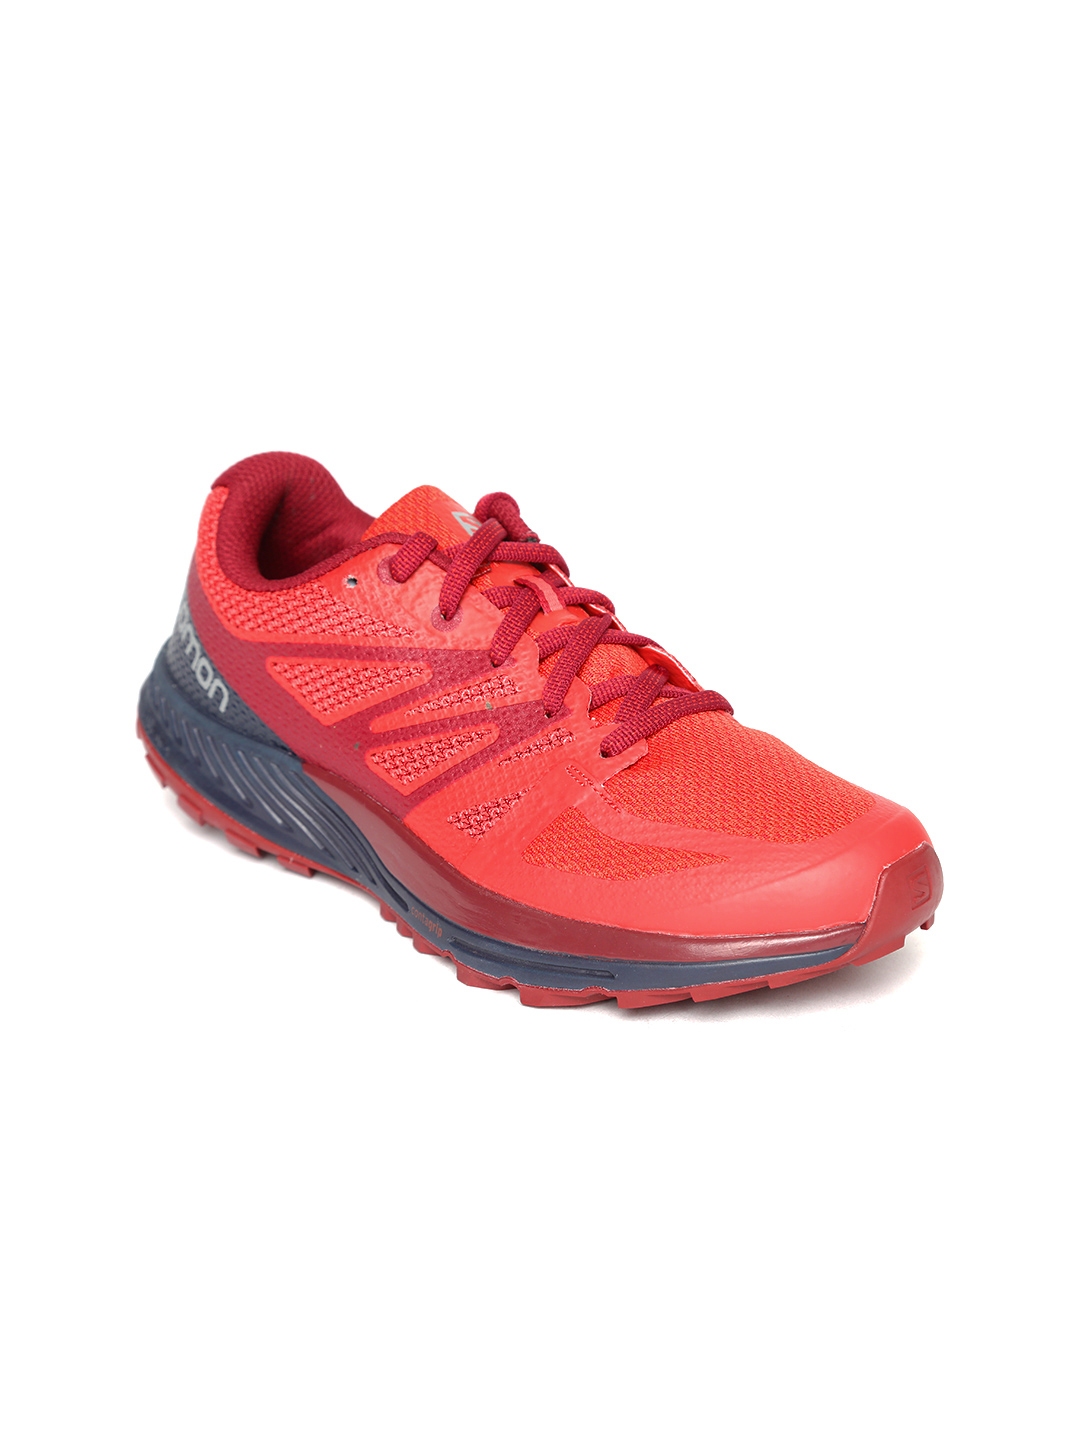 myntra ladies sports shoes